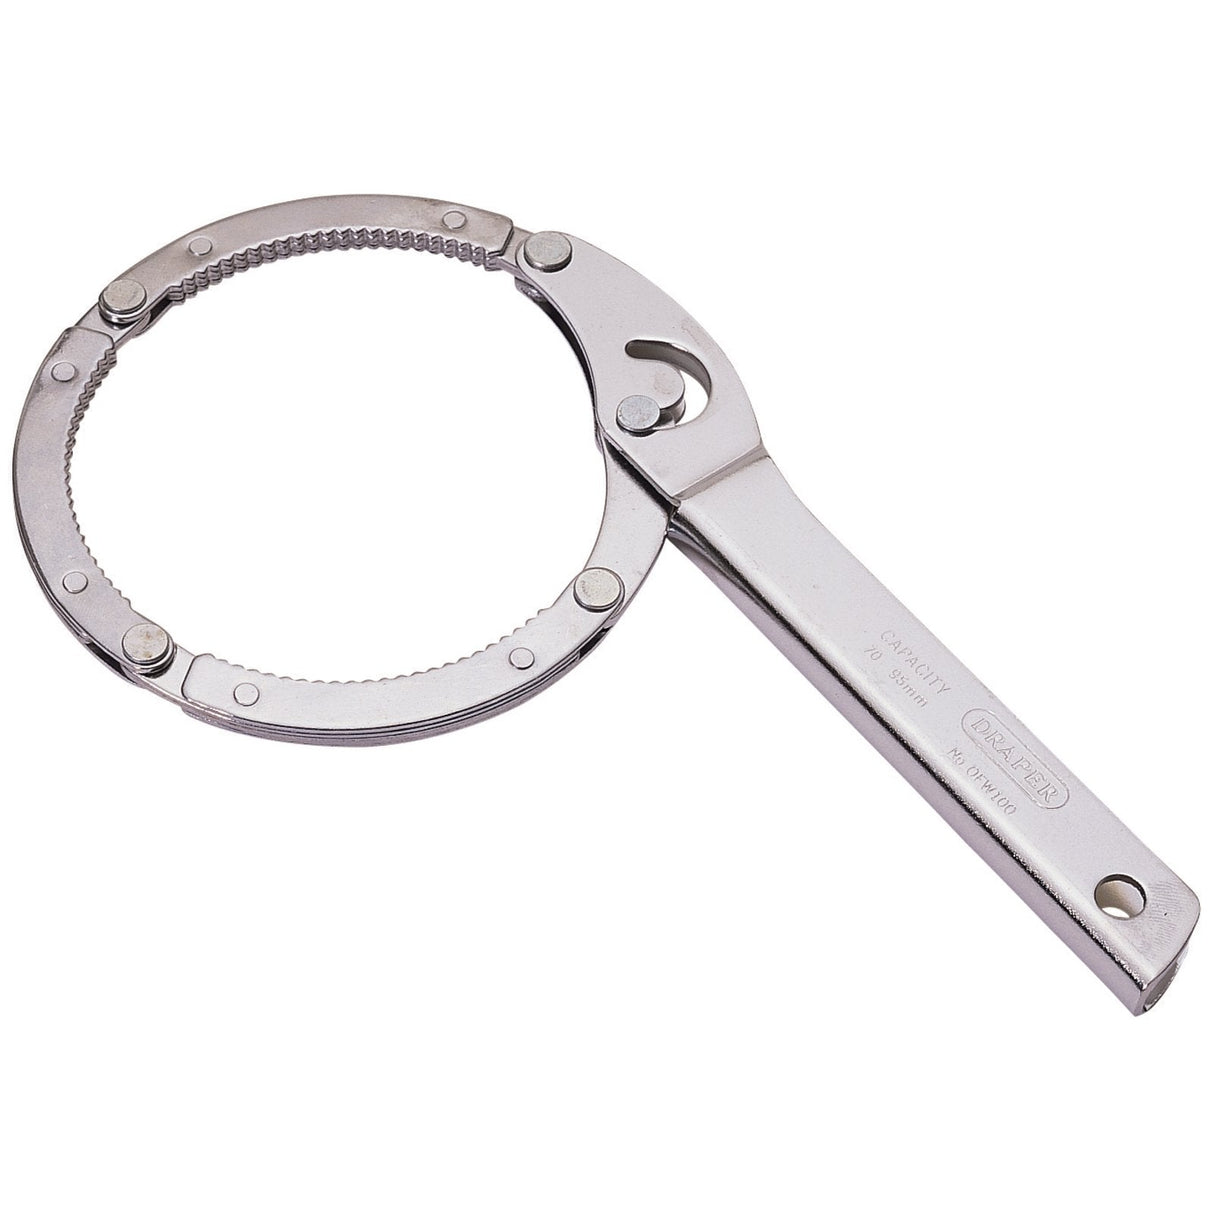 Draper Oil Filter Wrench, 100mm - OFW 100 - Farming Parts